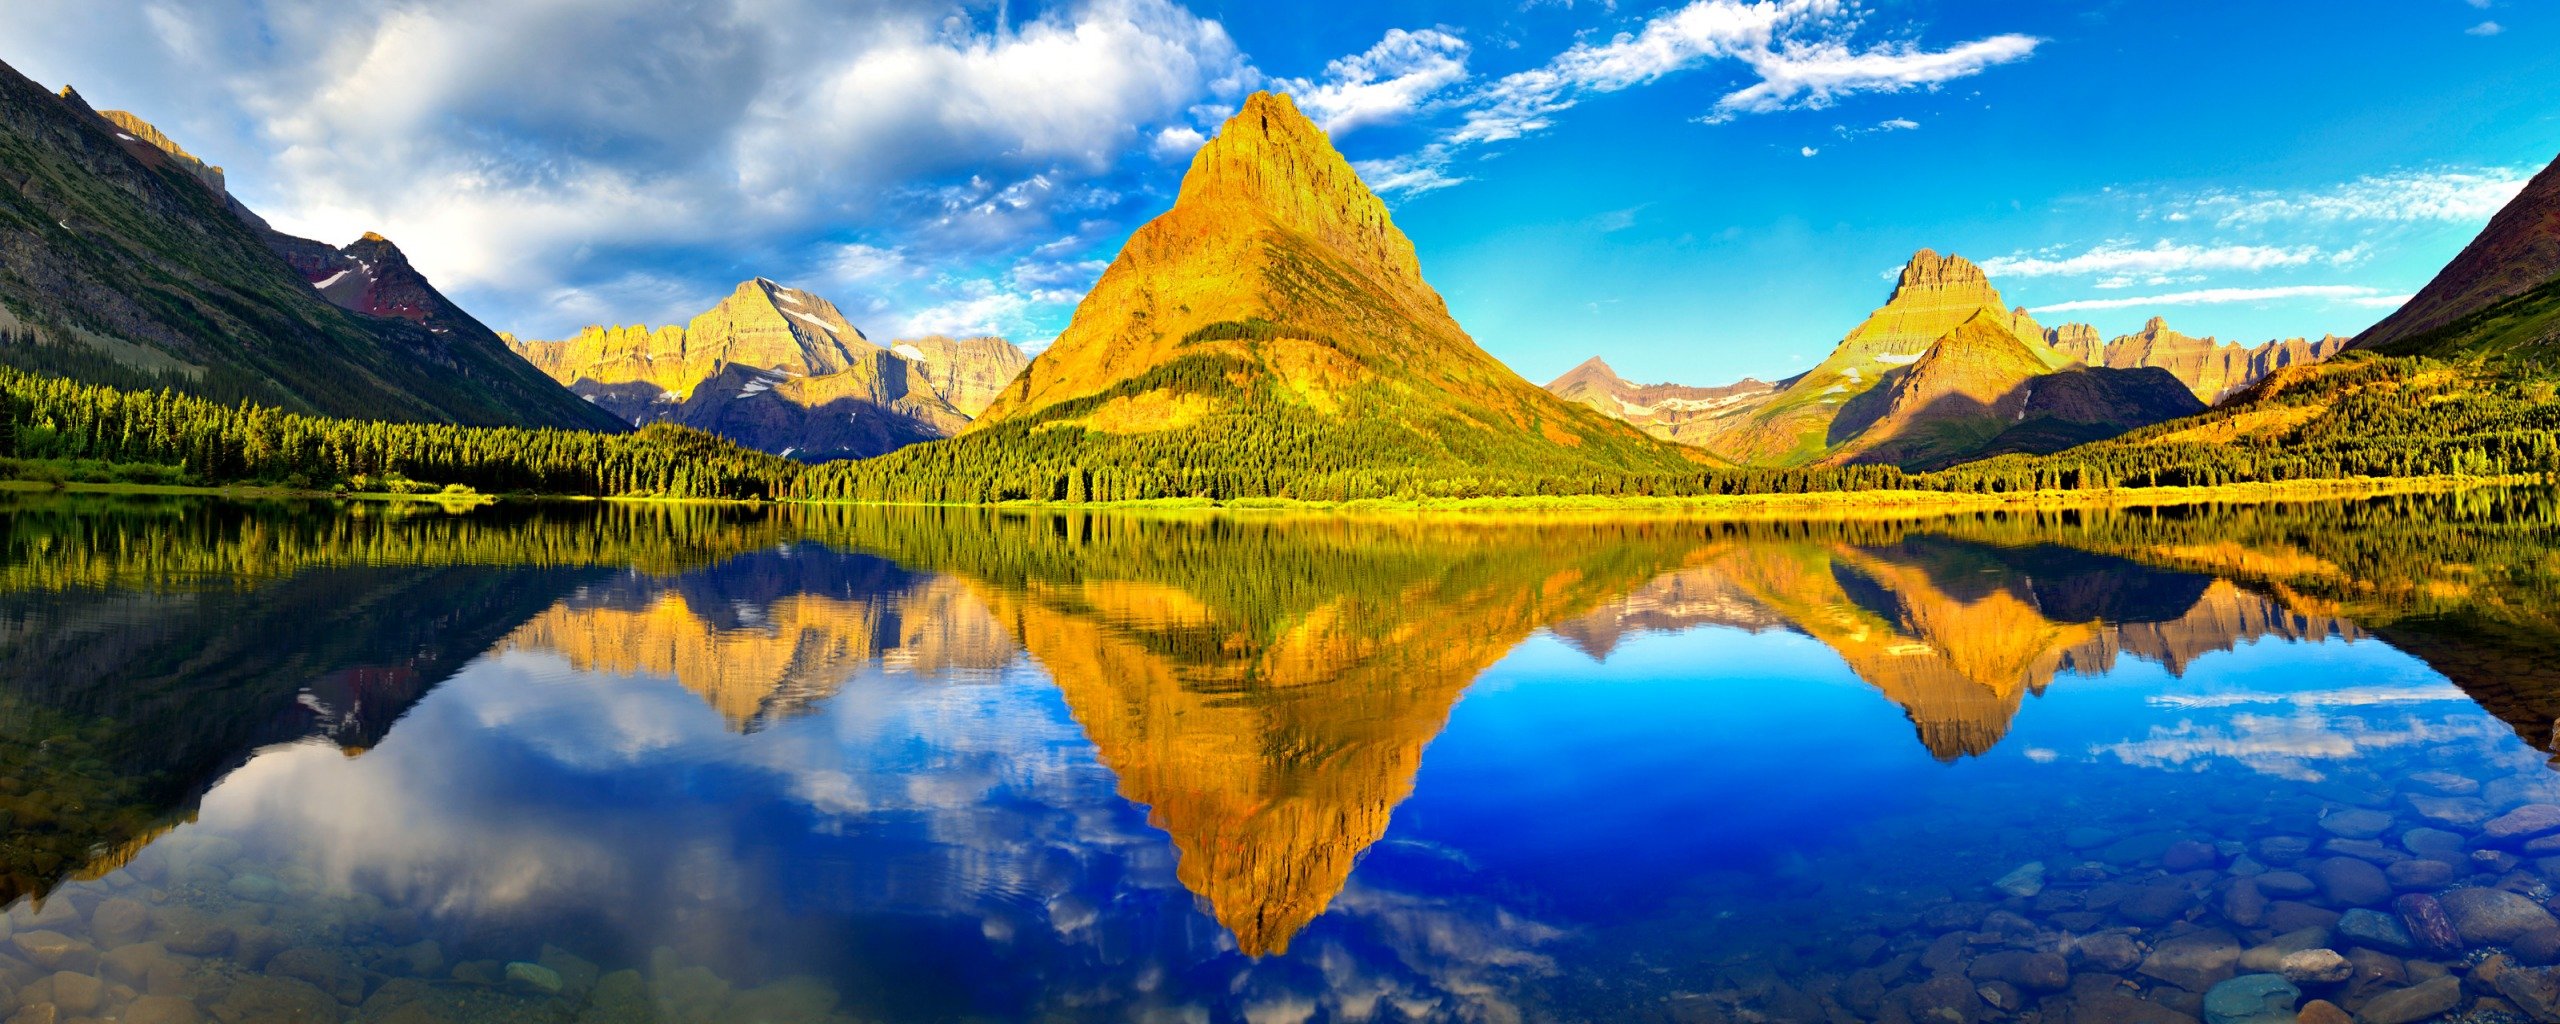 Glacier National Park Dual Monitor Wallpapers HD Wallpapers 2560x1024